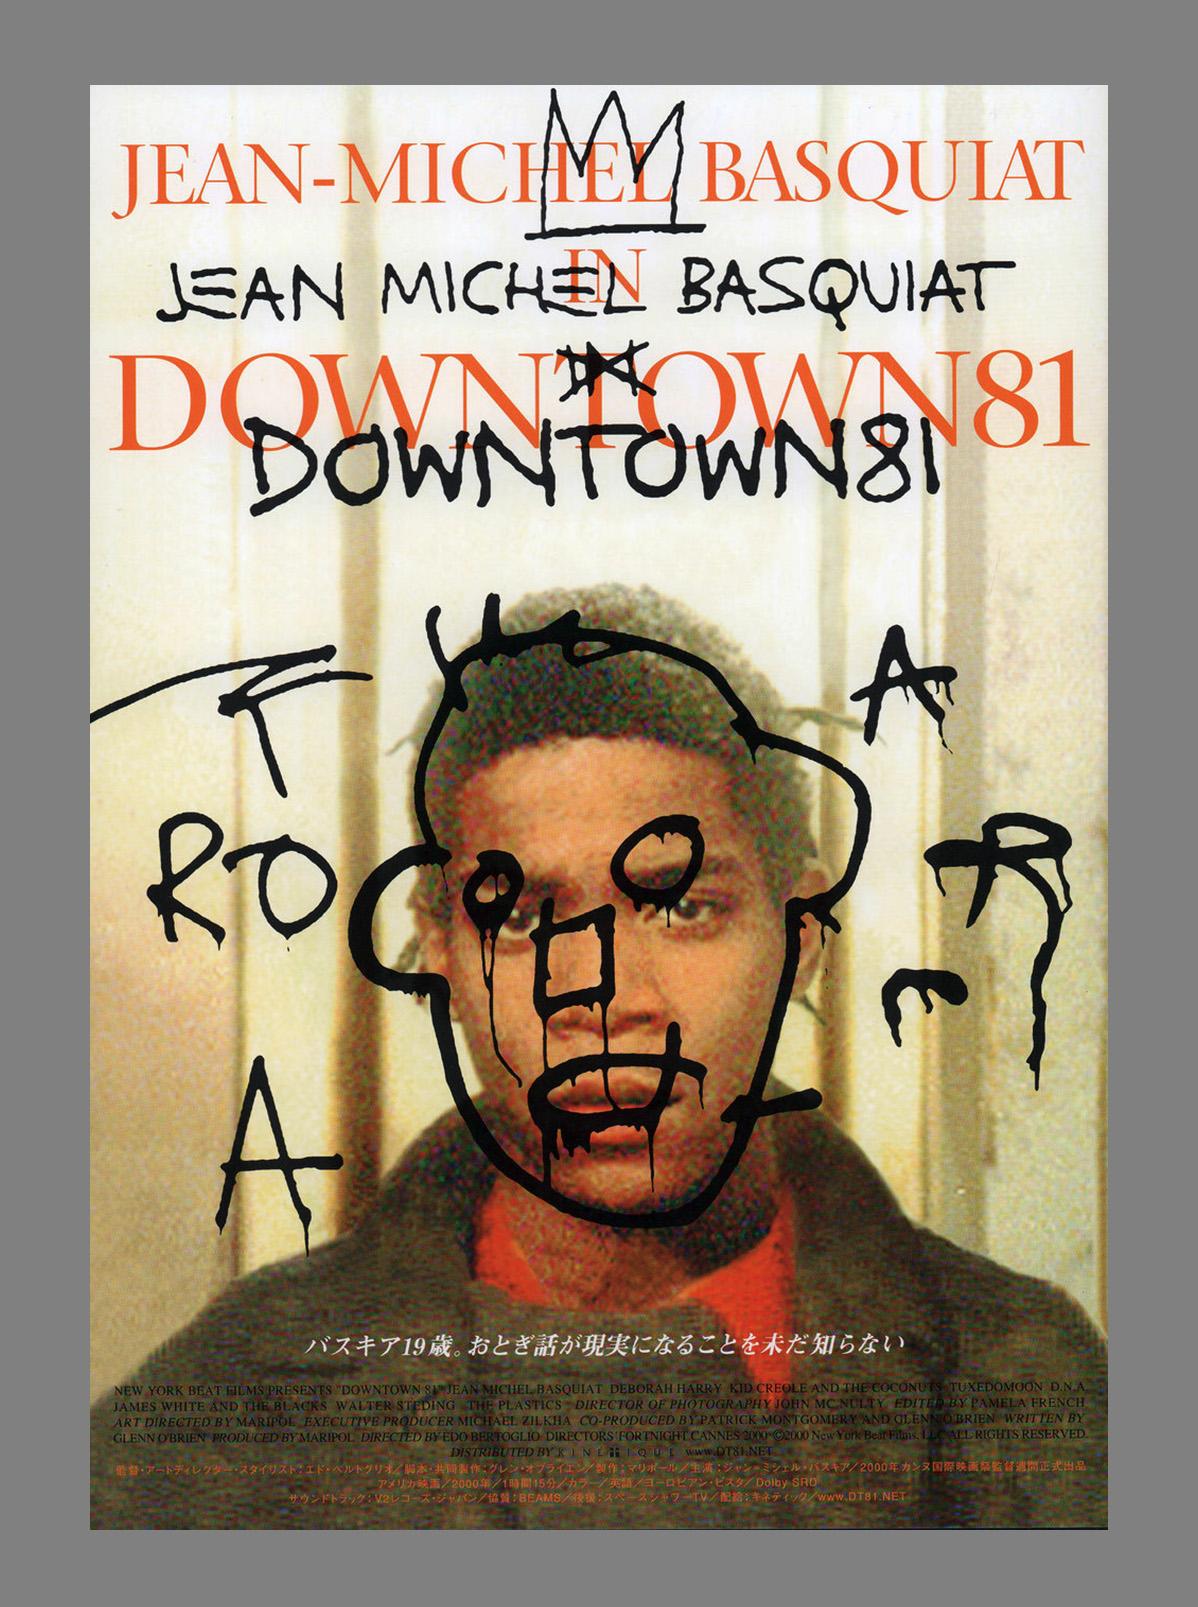 Basquiat Downtown 81 movie poster:
Vintage Japan promo poster, circa 2001 for the seminal Basquiat film, 'Downtown 81'.

Measures: 12 x 6 inches.
Minor signs of handling; otherwise very good to excellent condition.
Well-suited for framing

Downtown